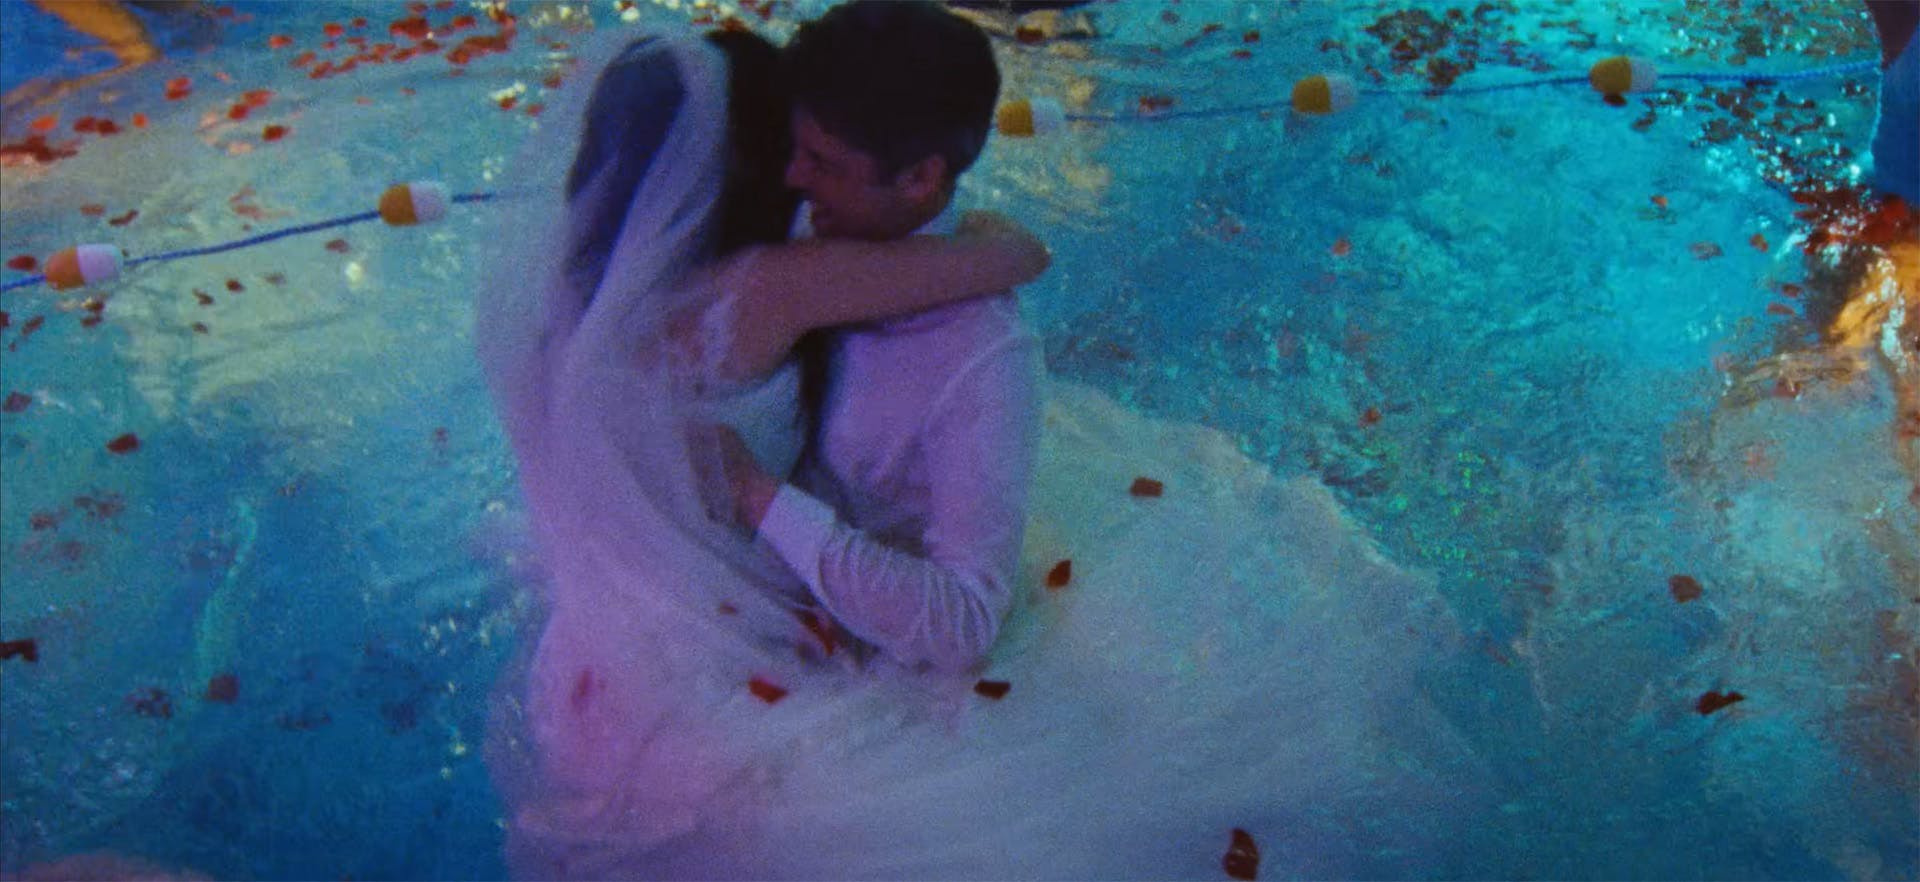 Still from the music video for Treat Each Other Right by Jamie xx, showing a bride and groom embracing in a swimming pool